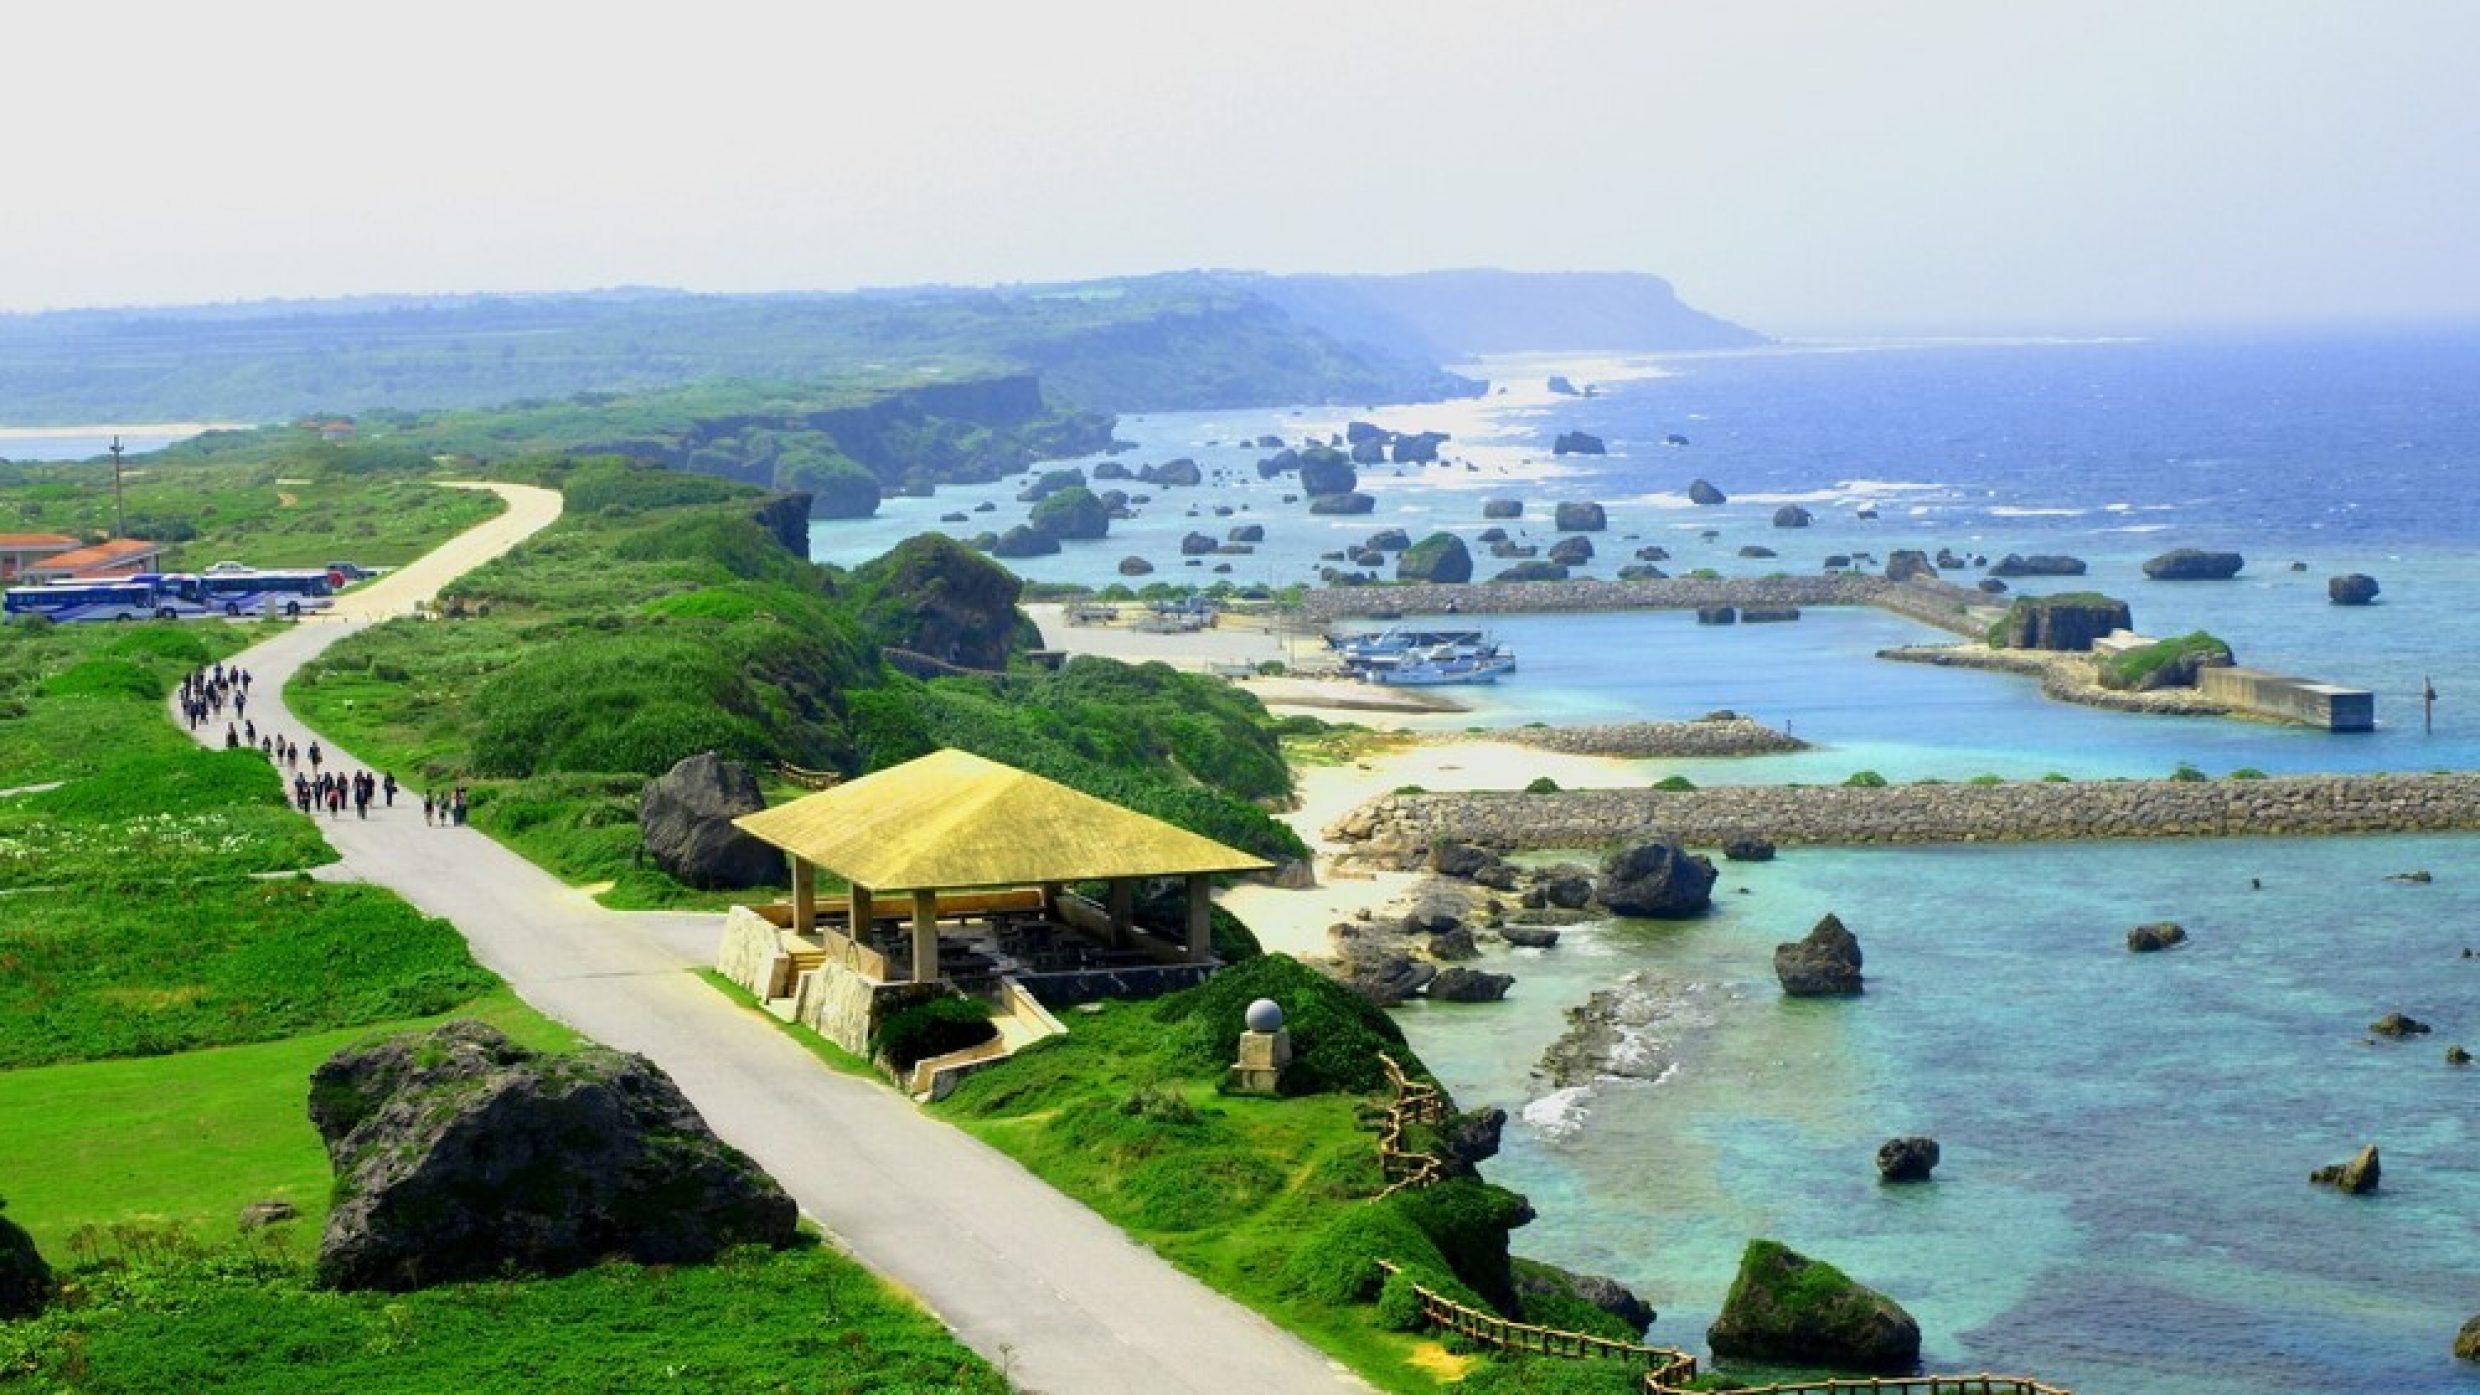 This Japanese island group is home to the highest density of authenticated hundred-year-olds in the world: 740 in a population of 1.3 million. The islands’ old folk also enjoy extraordinarily good health. Age-related illnesses occur rarely in Okinawa. 